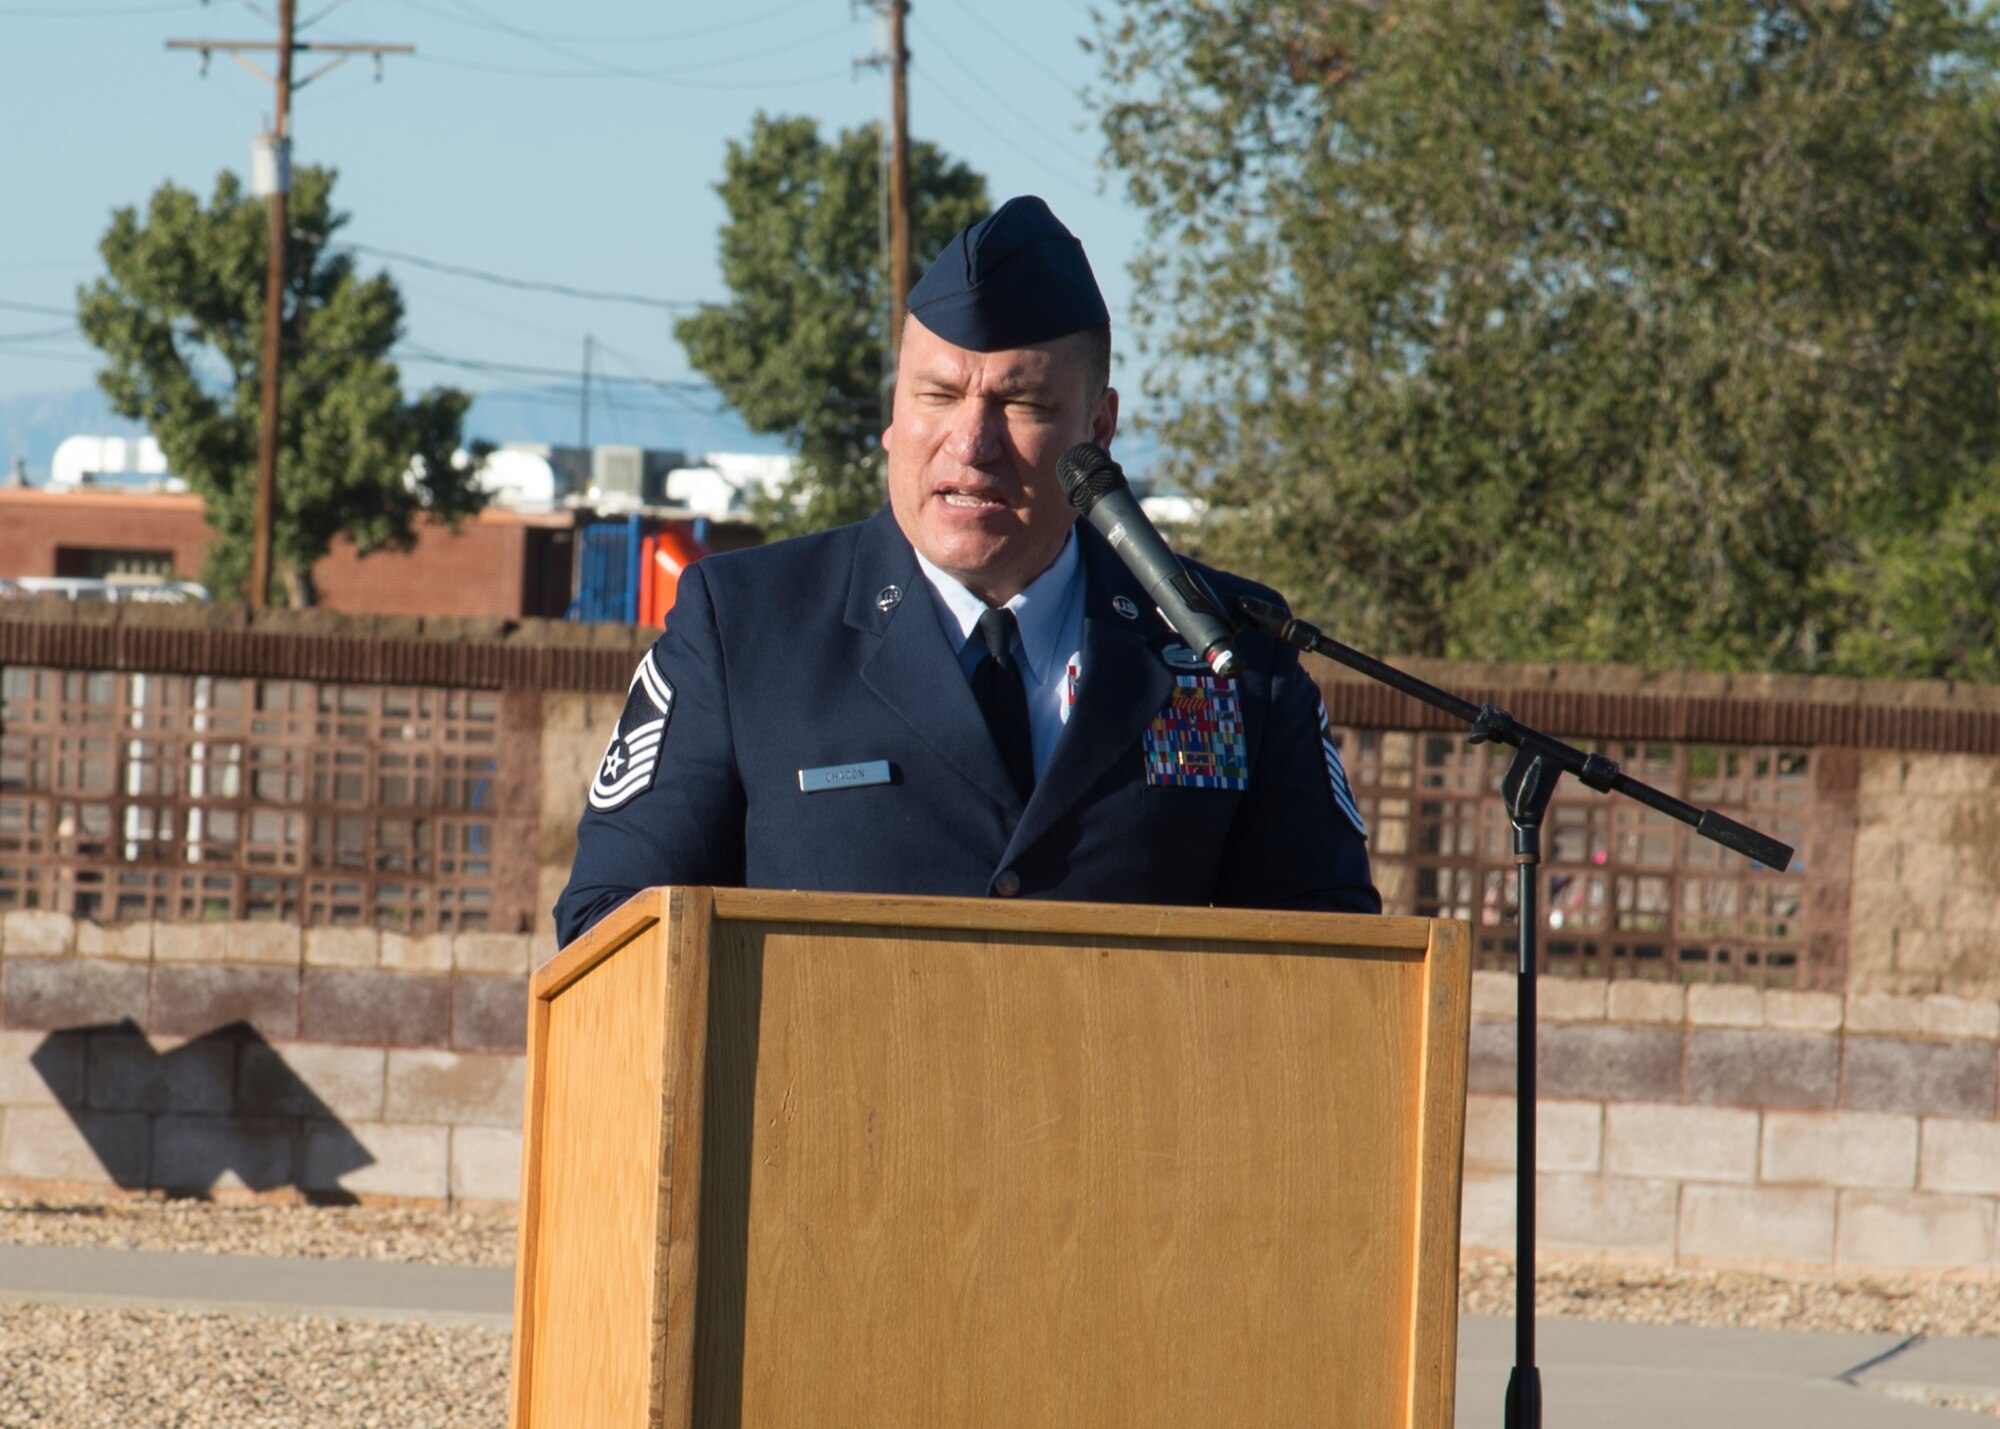 Senior Master Sgt. John Chacon, 49th Civil Engineer Squadron operations superintendent, speaks at the POW/MIA ceremony at Heritage Park on Holloman Air Force Base, N.M., Sept. 21. The ceremony, in rememberance of prisoners-of-war and those still missing-in-action, was part of Holloman's POW/MIA commemoration. (U.S. Air Force photo by Airman 1st Class Kindra Stewart)